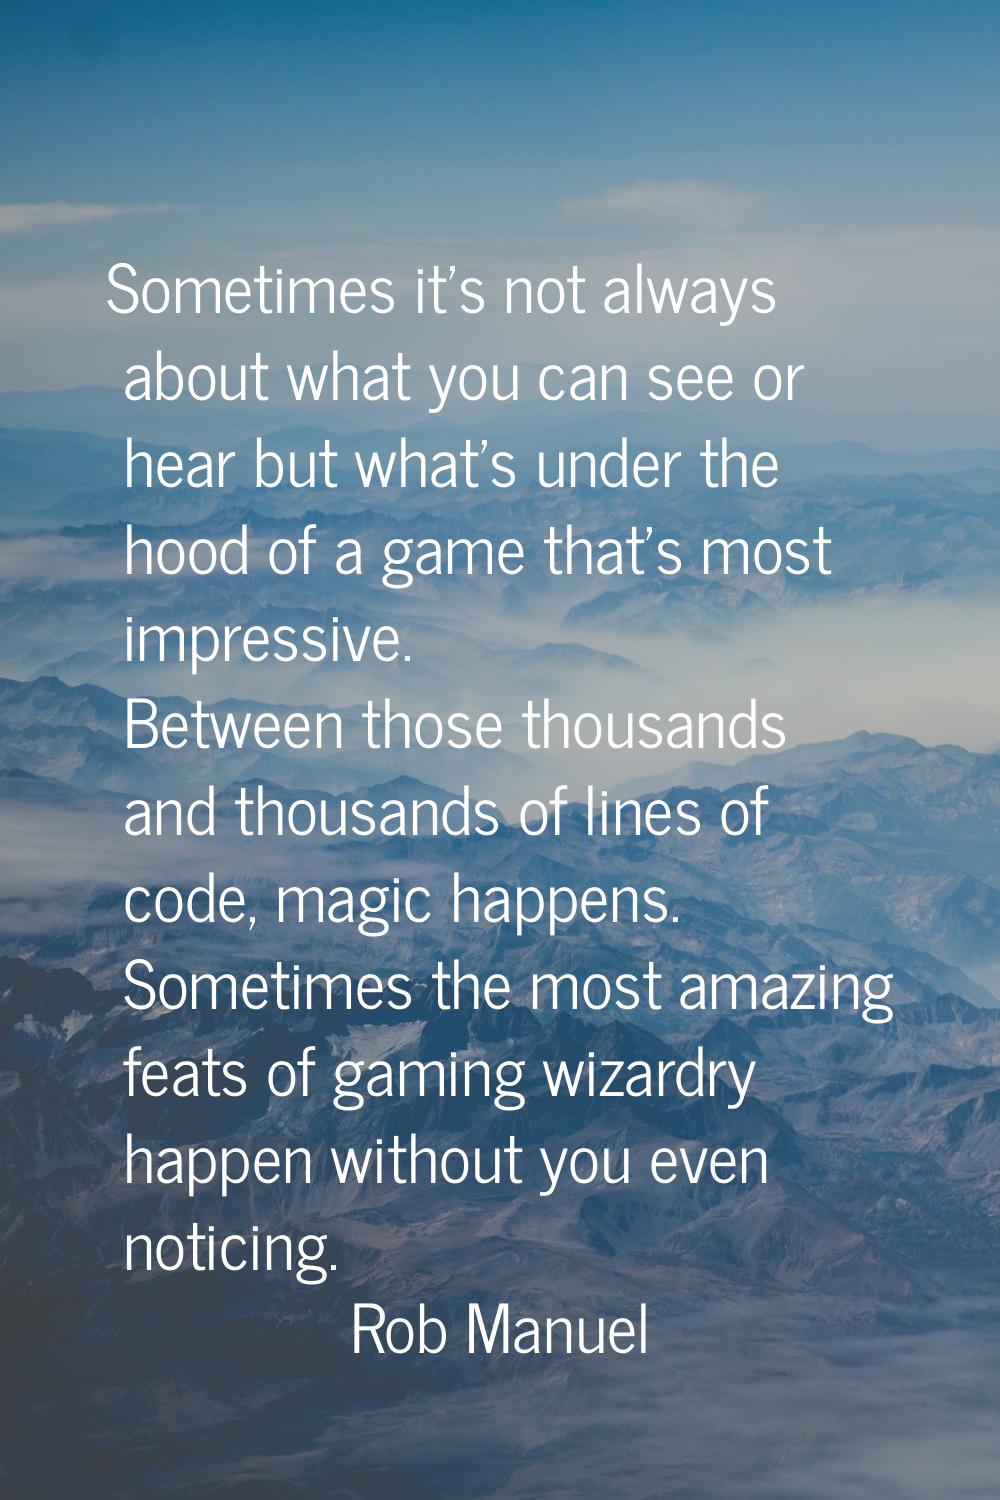 Sometimes it's not always about what you can see or hear but what's under the hood of a game that's